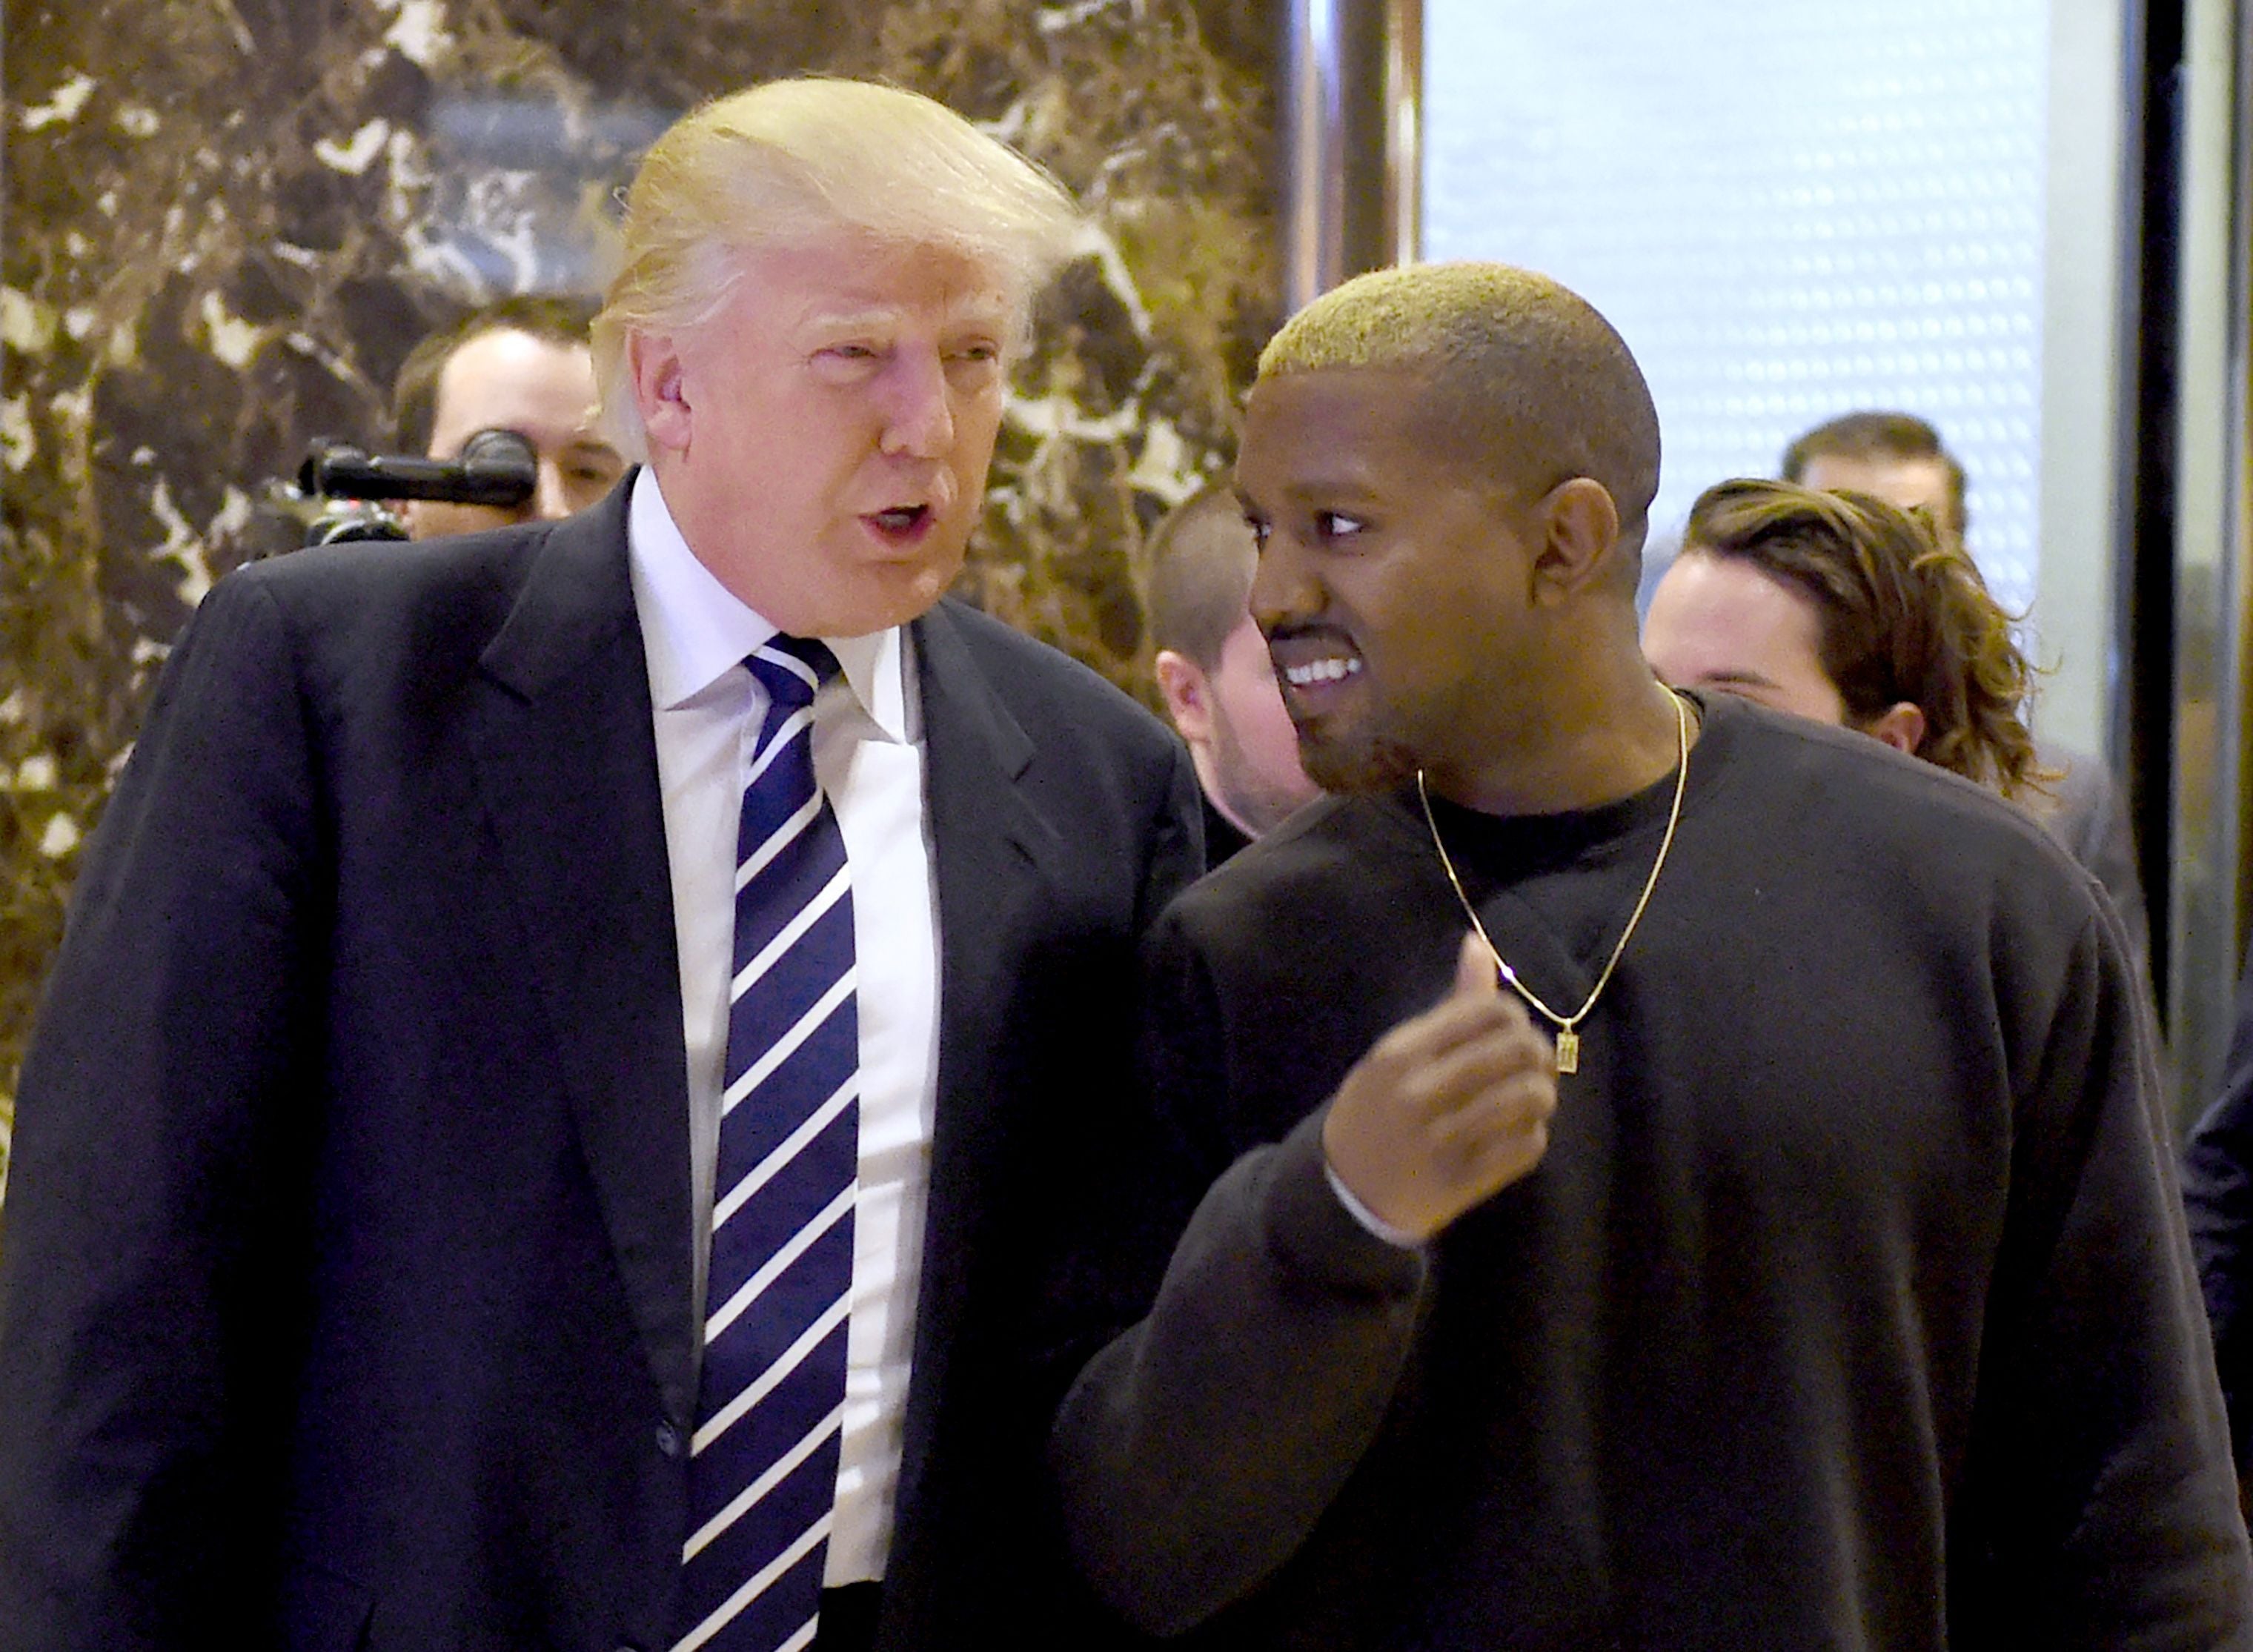 In this file photo taken on December 13, 2016, singer Kanye West and President-elect Donald Trump arrive to speak with the press after their meetings at Trump Tower in New York